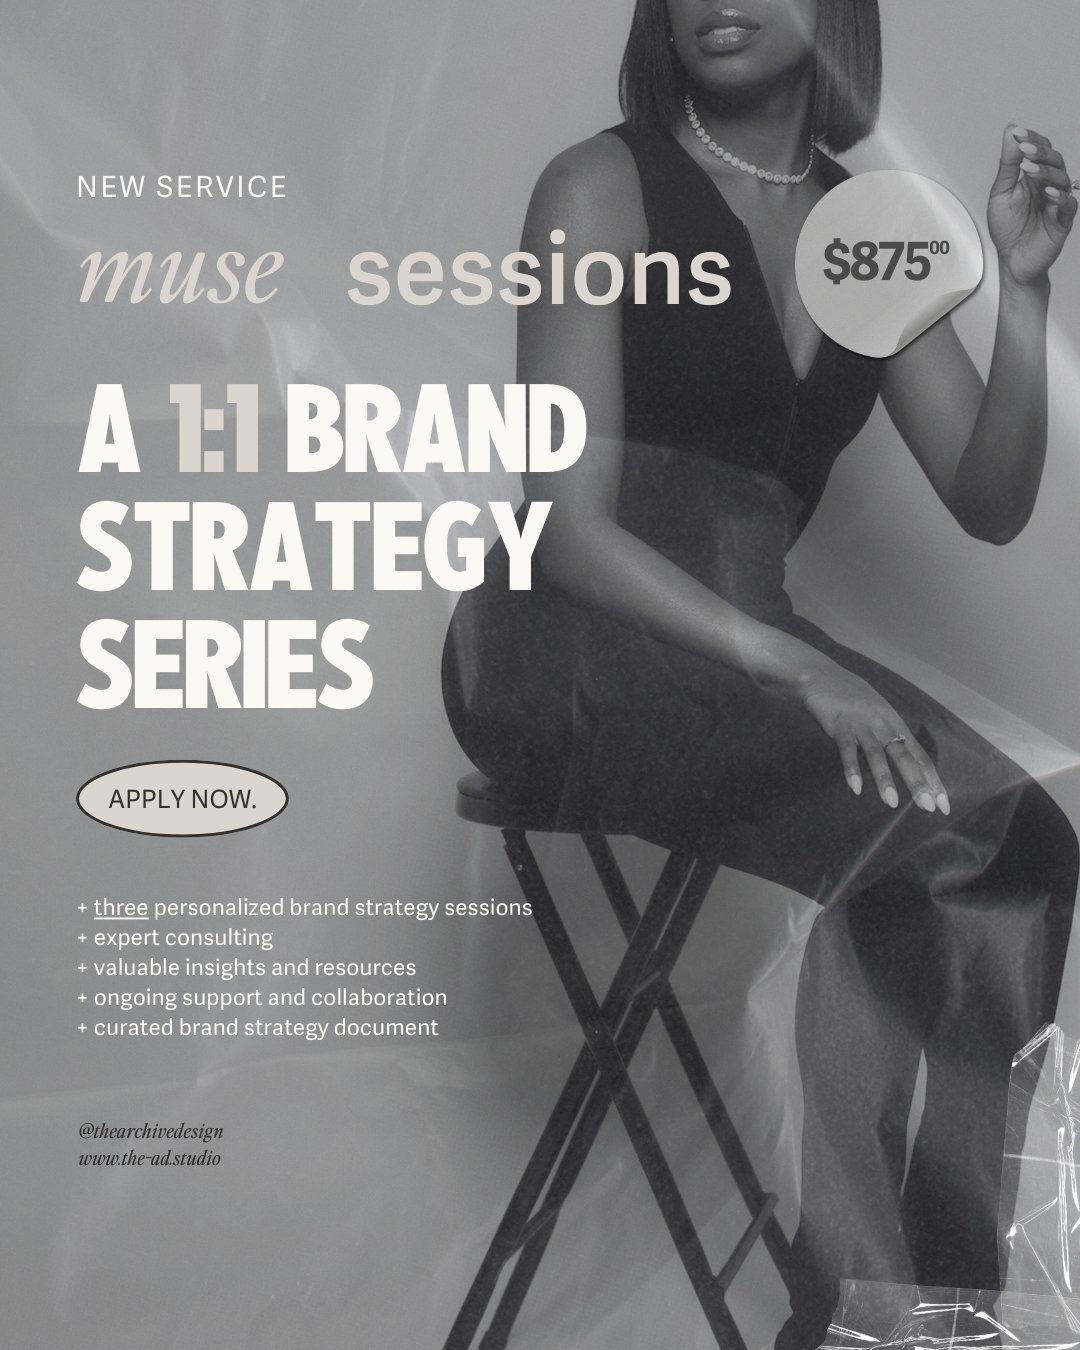 *new service* ⚡️ introducing muse sessions. a one-on-one brand strategy series that includes three personalized strategy sessions, expert consulting, and ongoing support + collaboration. 

working with the archive has always been valuable. with ten (